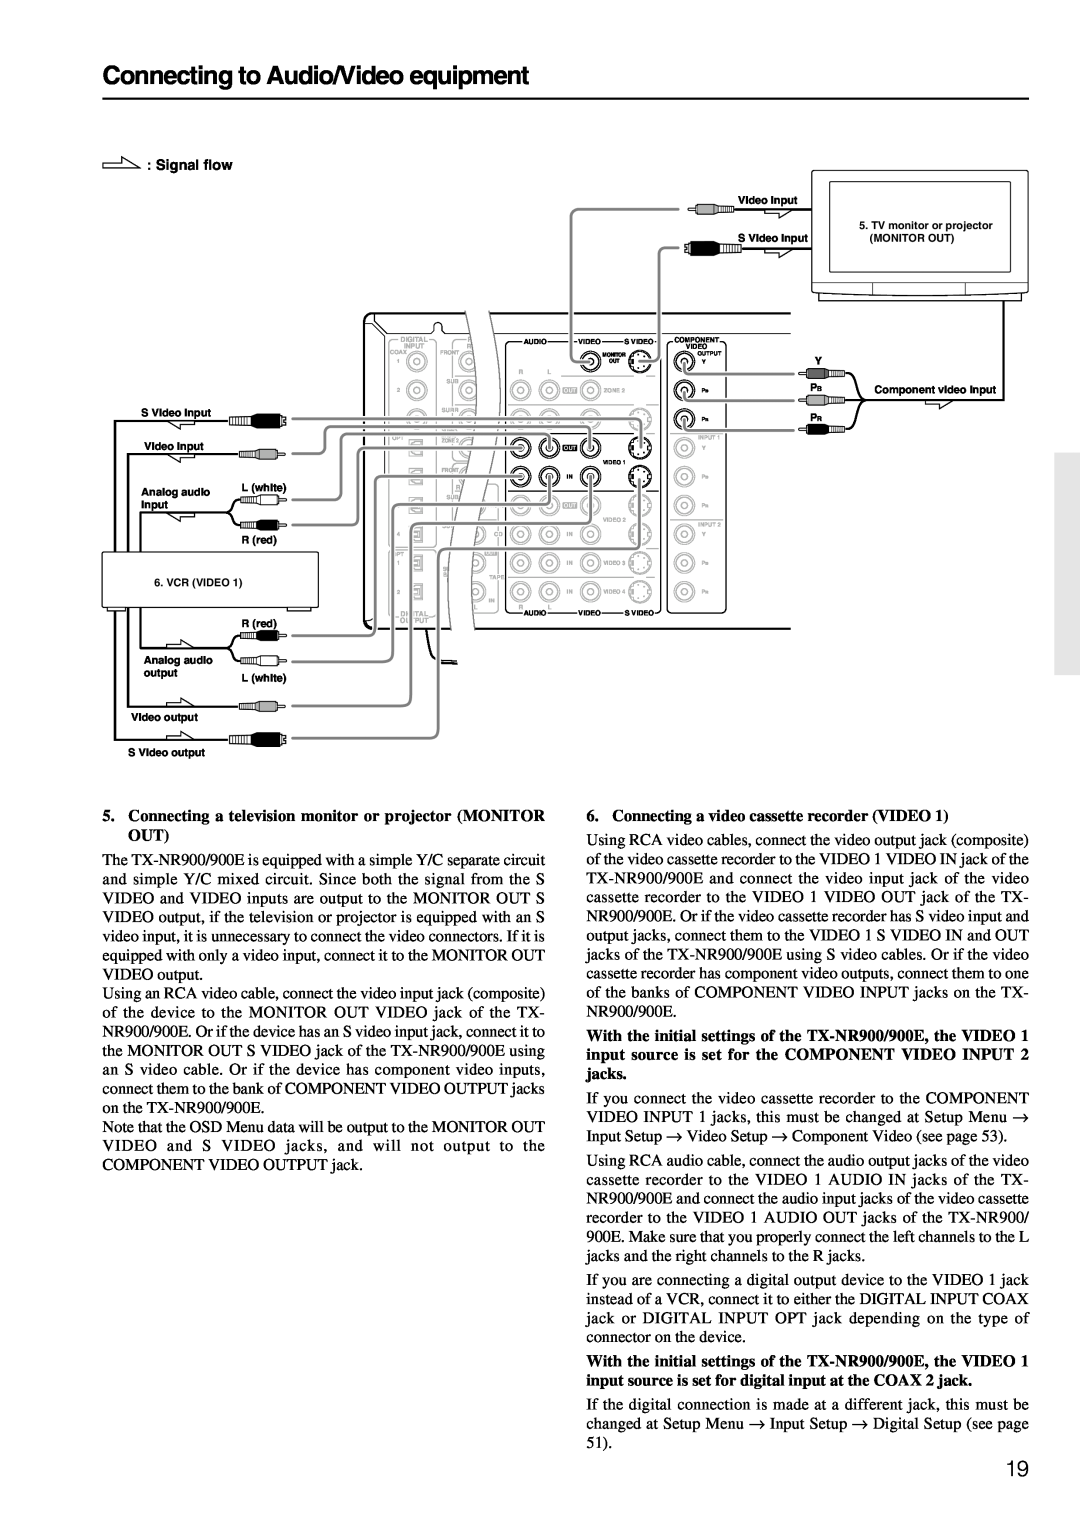 Onkyo TX-NR900E instruction manual Connecting to Audio/Video equipment, Connecting a video cassette recorder VIDEO 